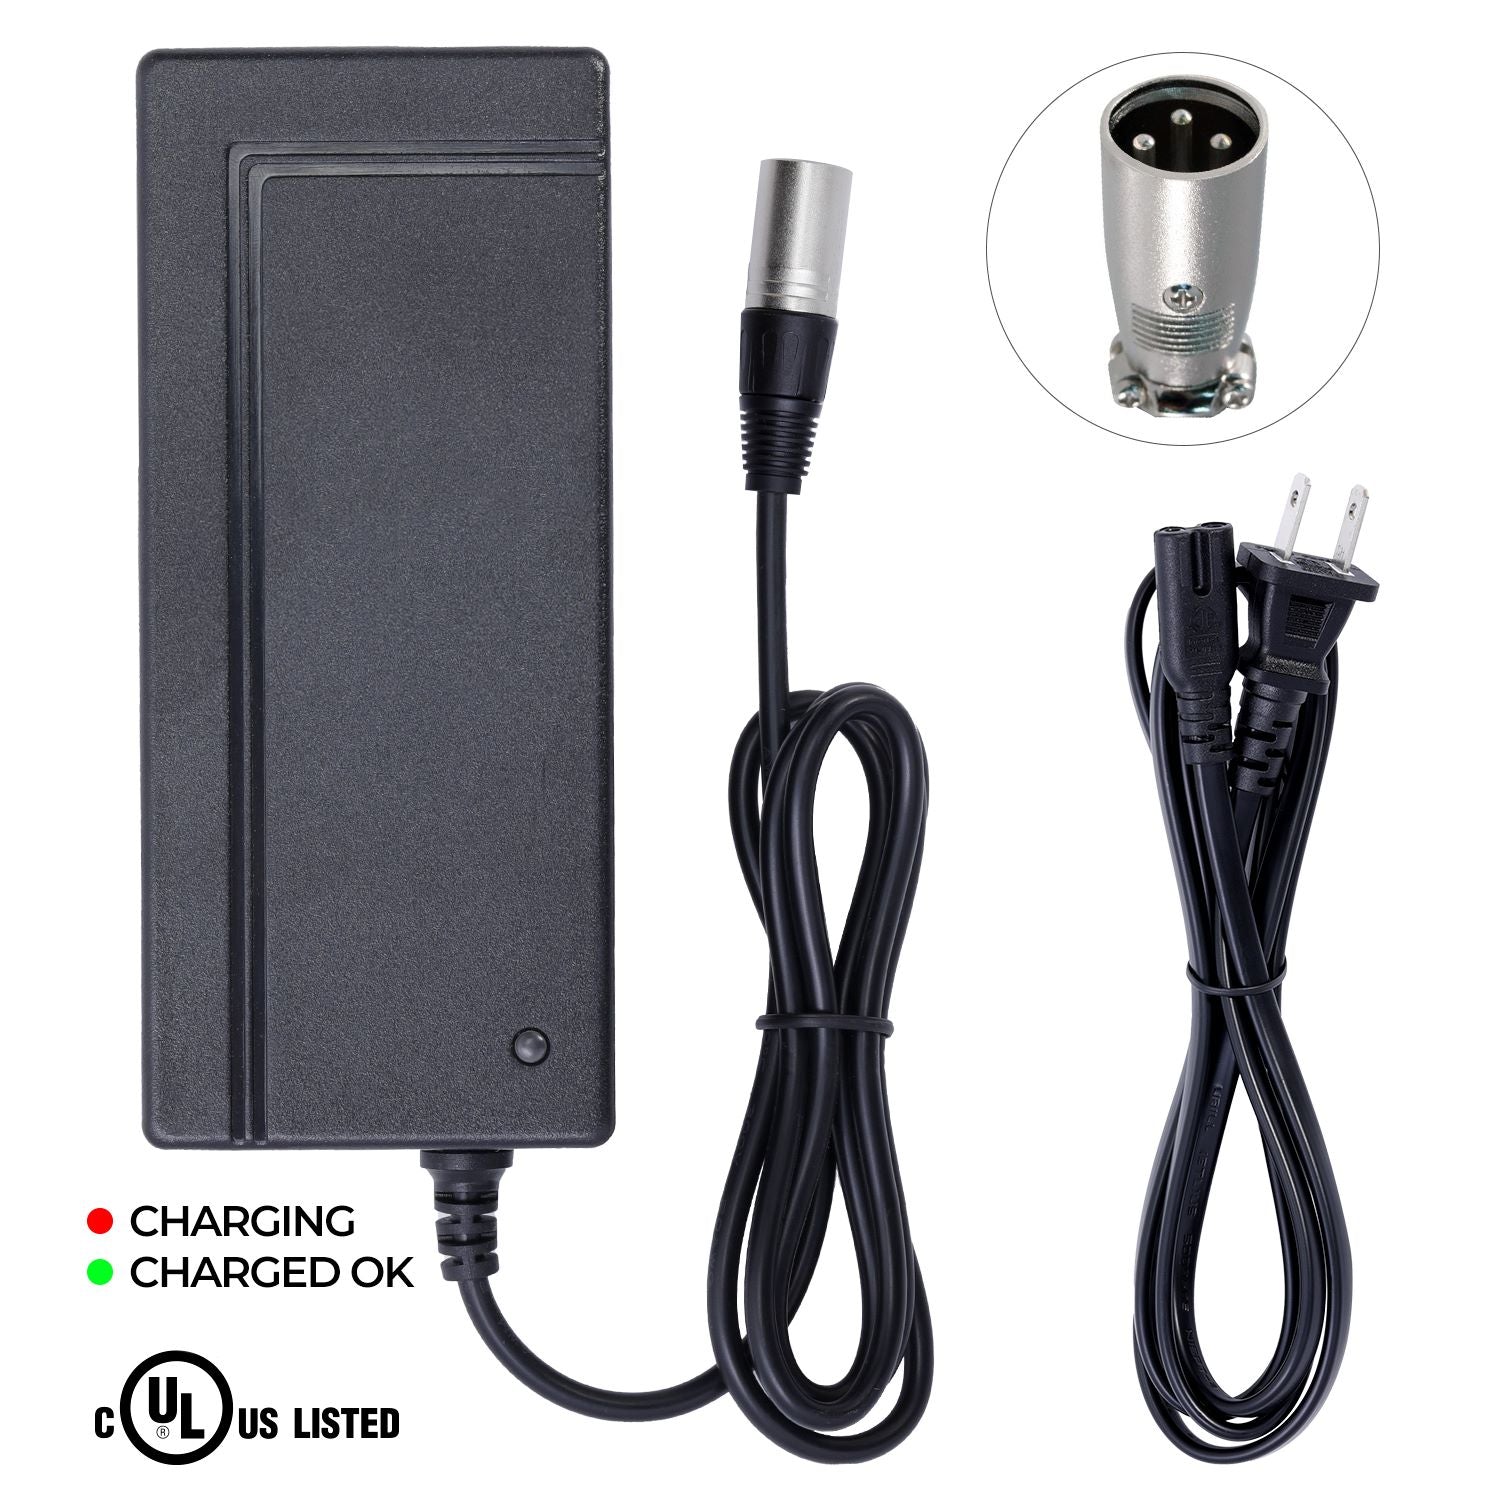 Charger for Shoprider Sunrunner S 777-3/4 Scooter